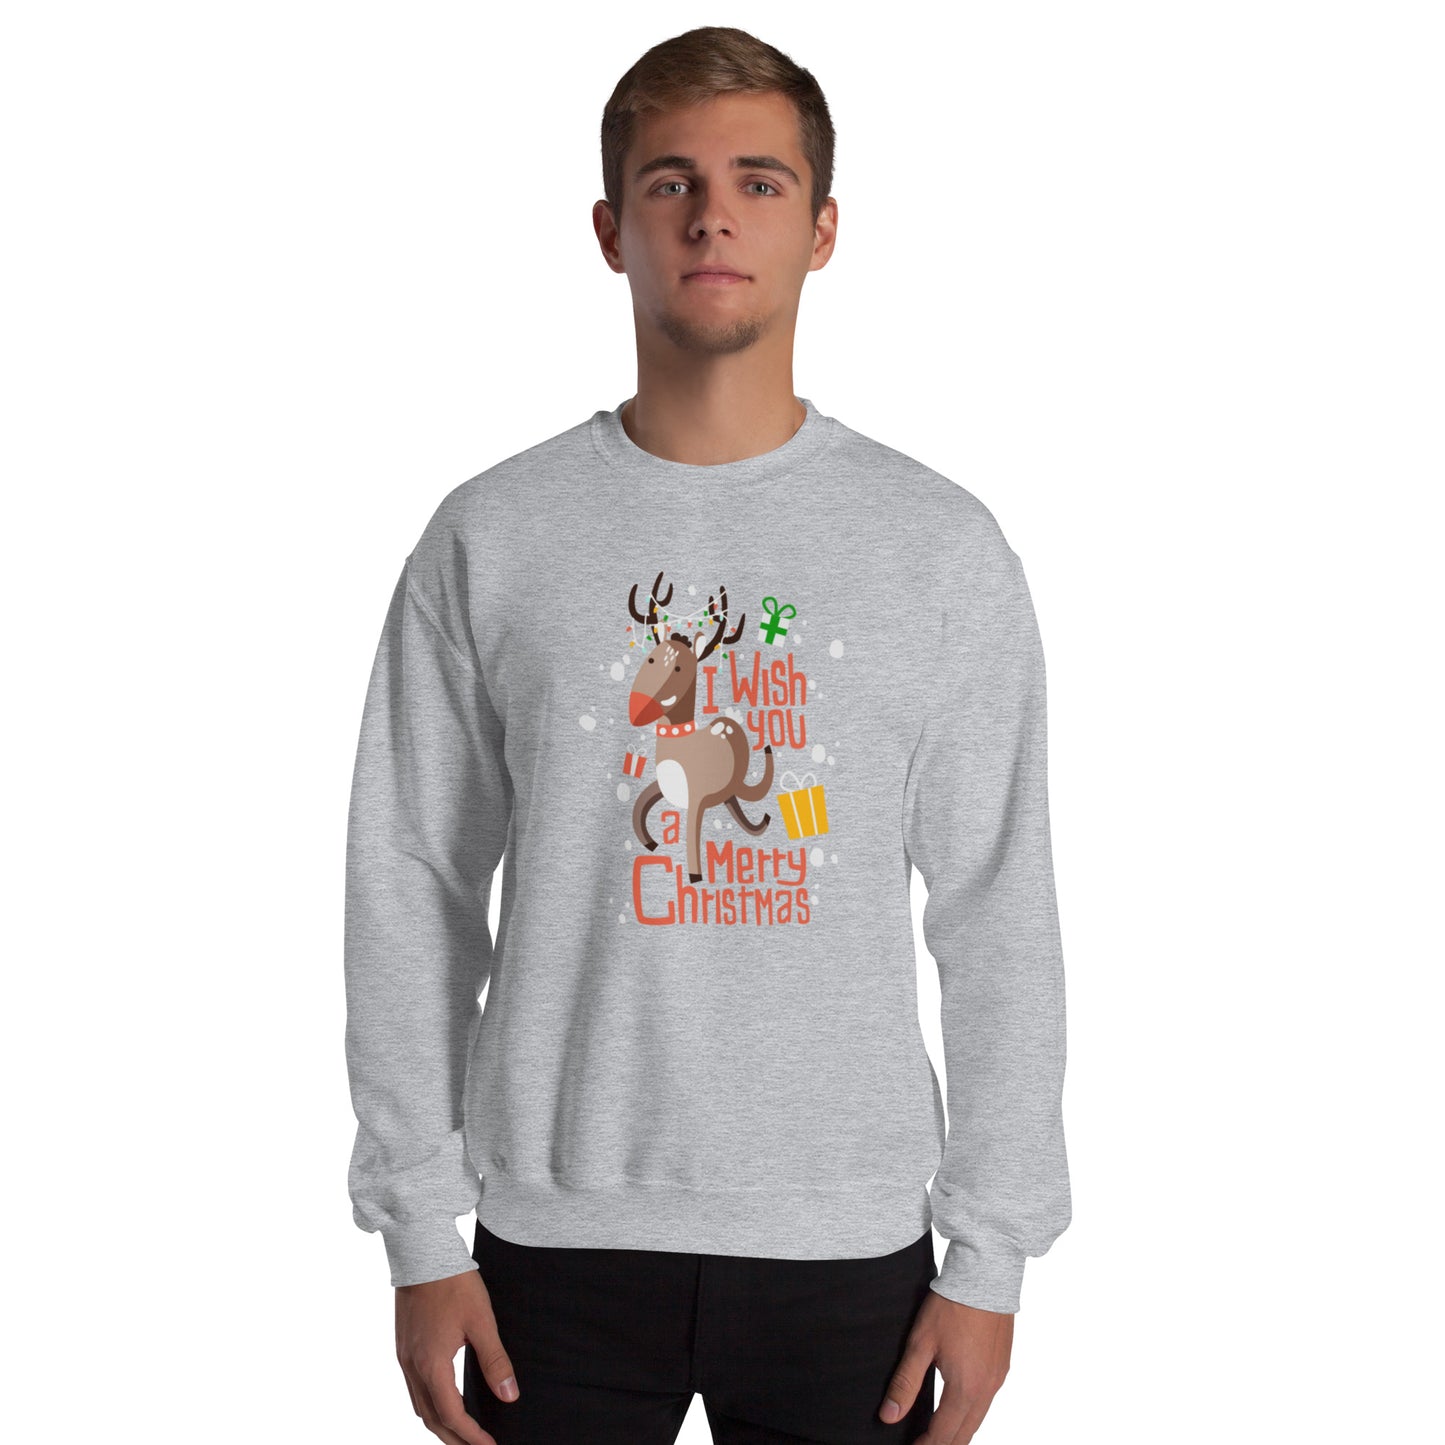 I Wish You a Mary Christmas Unisex Sweatshirt - Spread Warmth and Cheer with Festive Comfort